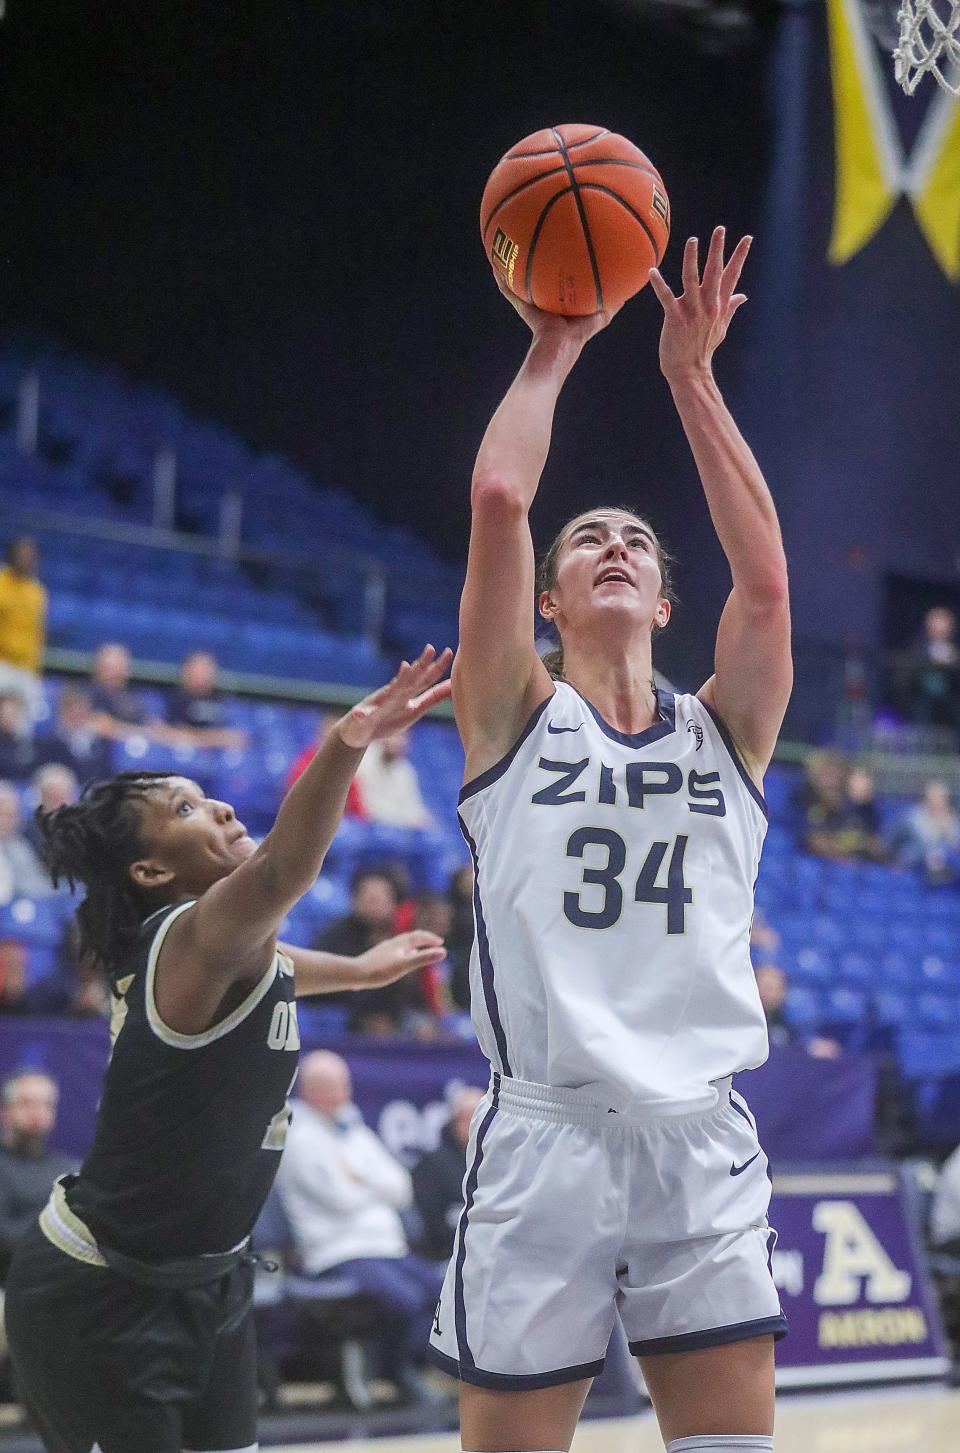 University of Akron forward Reagan Bass puts up a shot in the paint against Oakland on Monday in Akron.